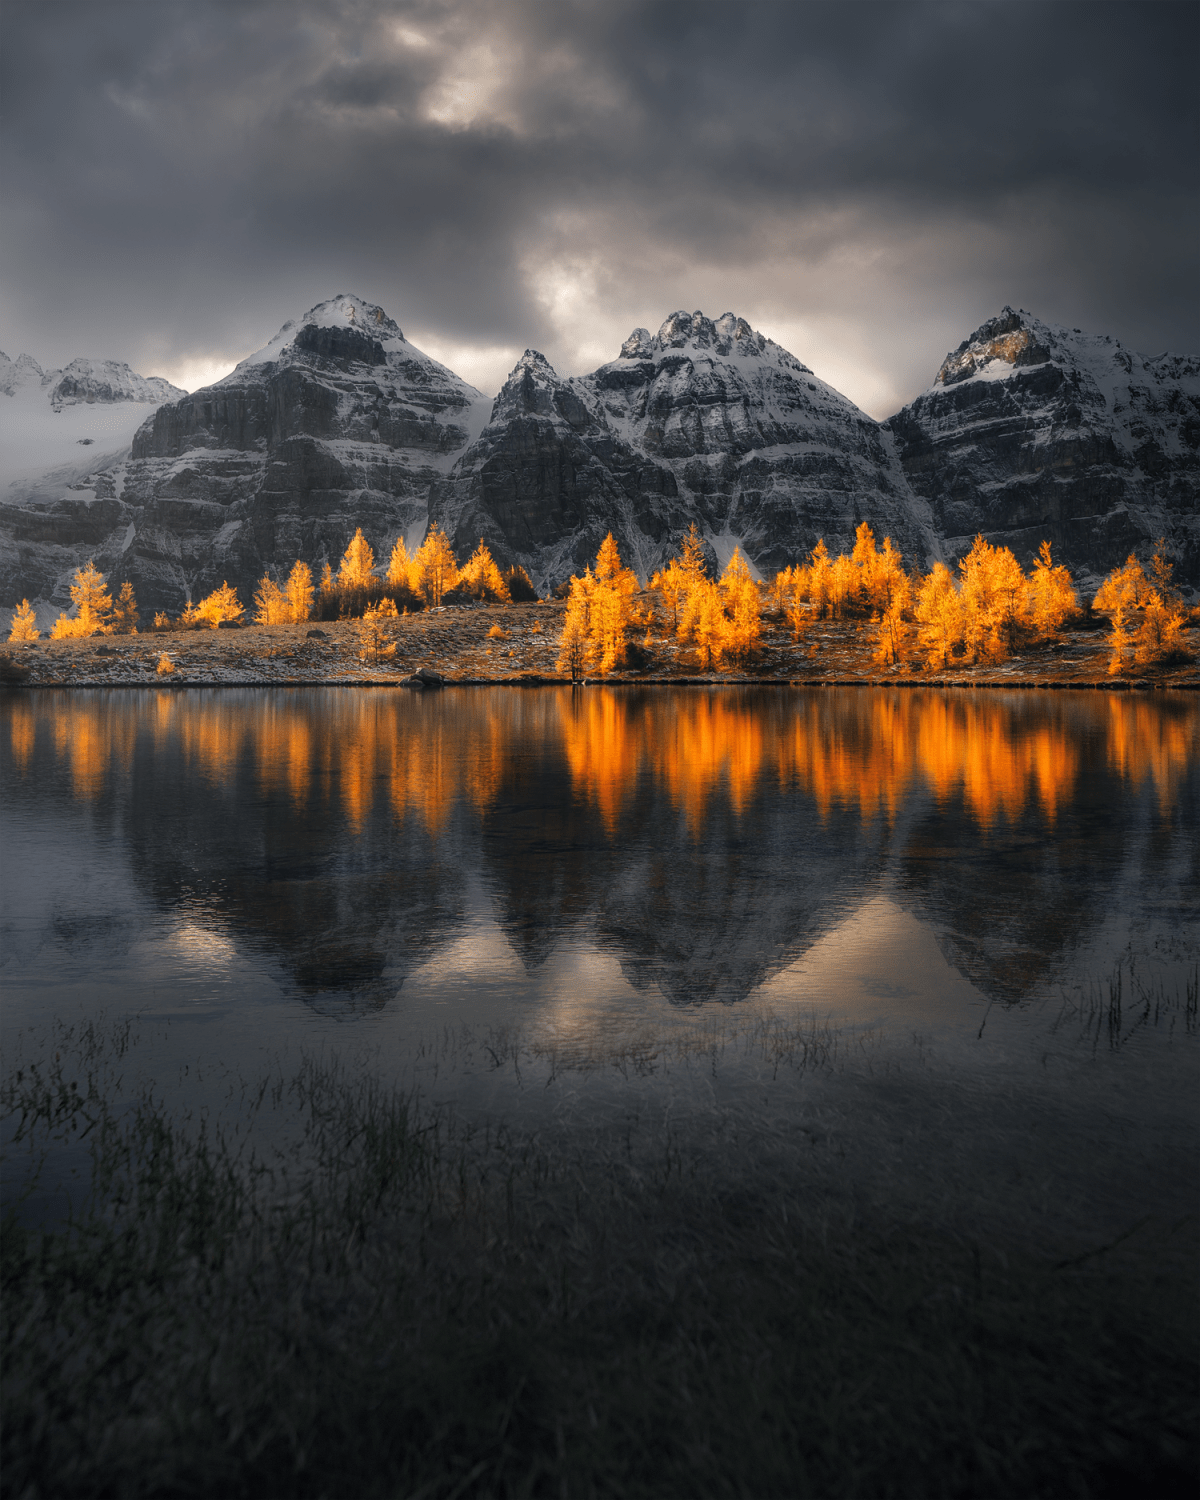 Golden larch trees partially lit up by the sunlight. Valley of the Ten Peaks, Banff, Canada